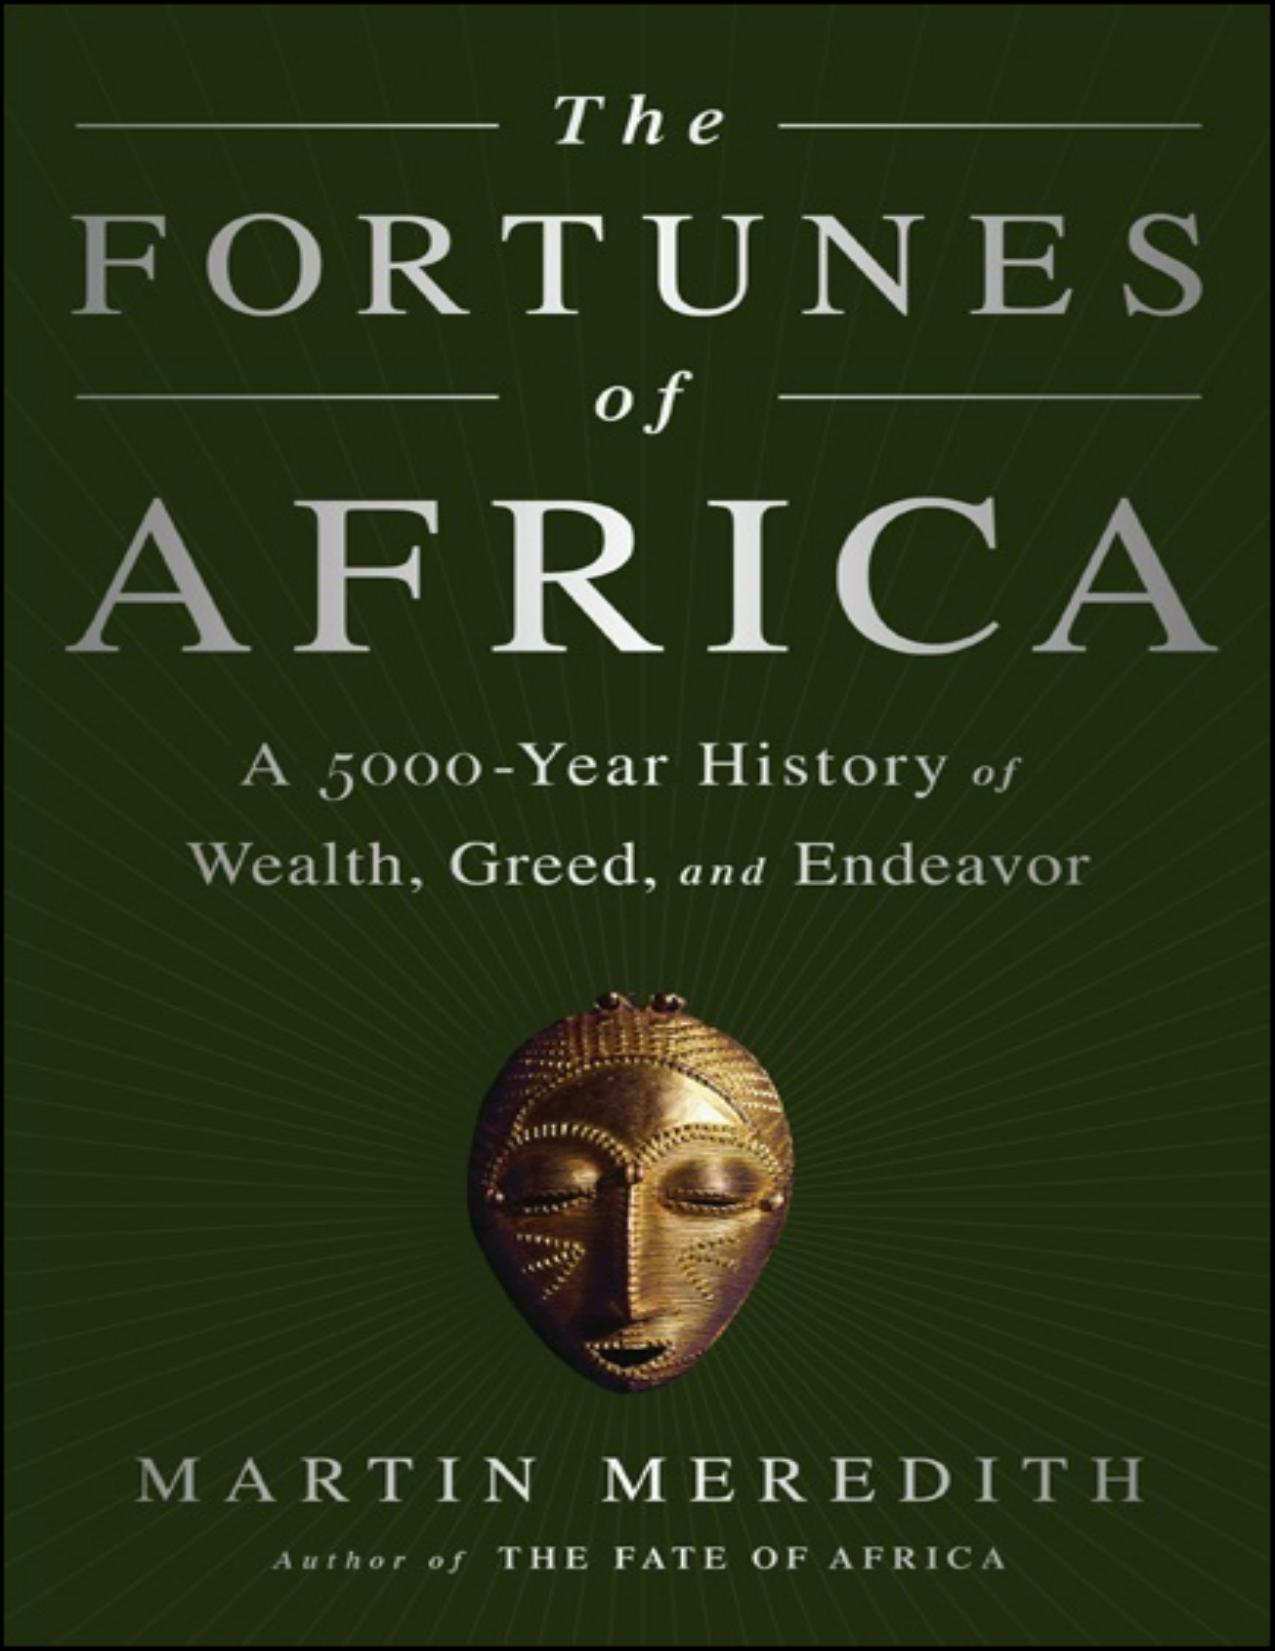 The Fortunes of Africa: A 5000-Year History of Wealth, Greed, and Endeavor - PDFDrive.com